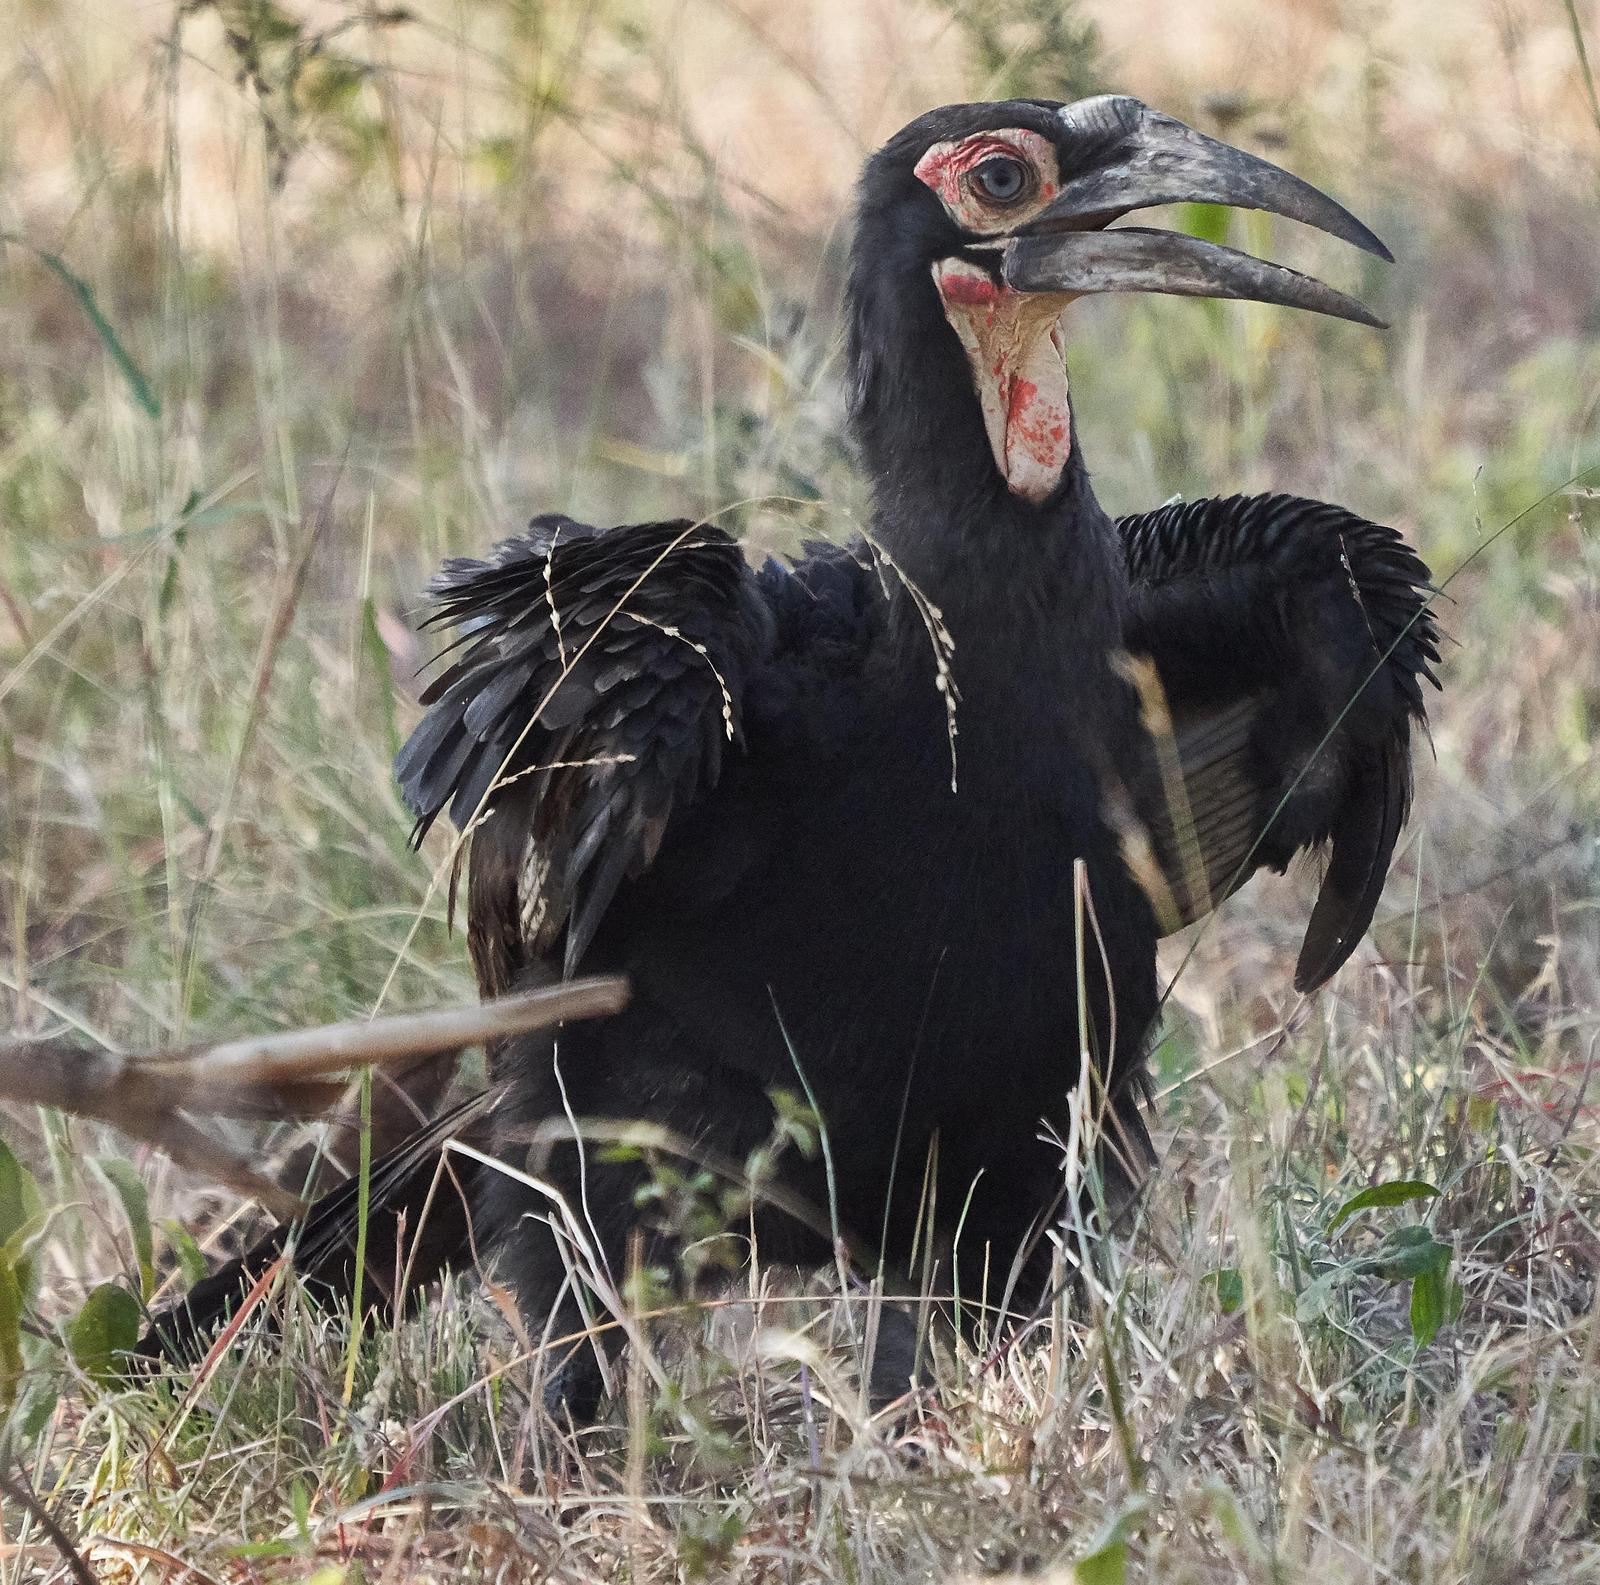 Southern Ground-Hornbill Photo by Steven Cheong